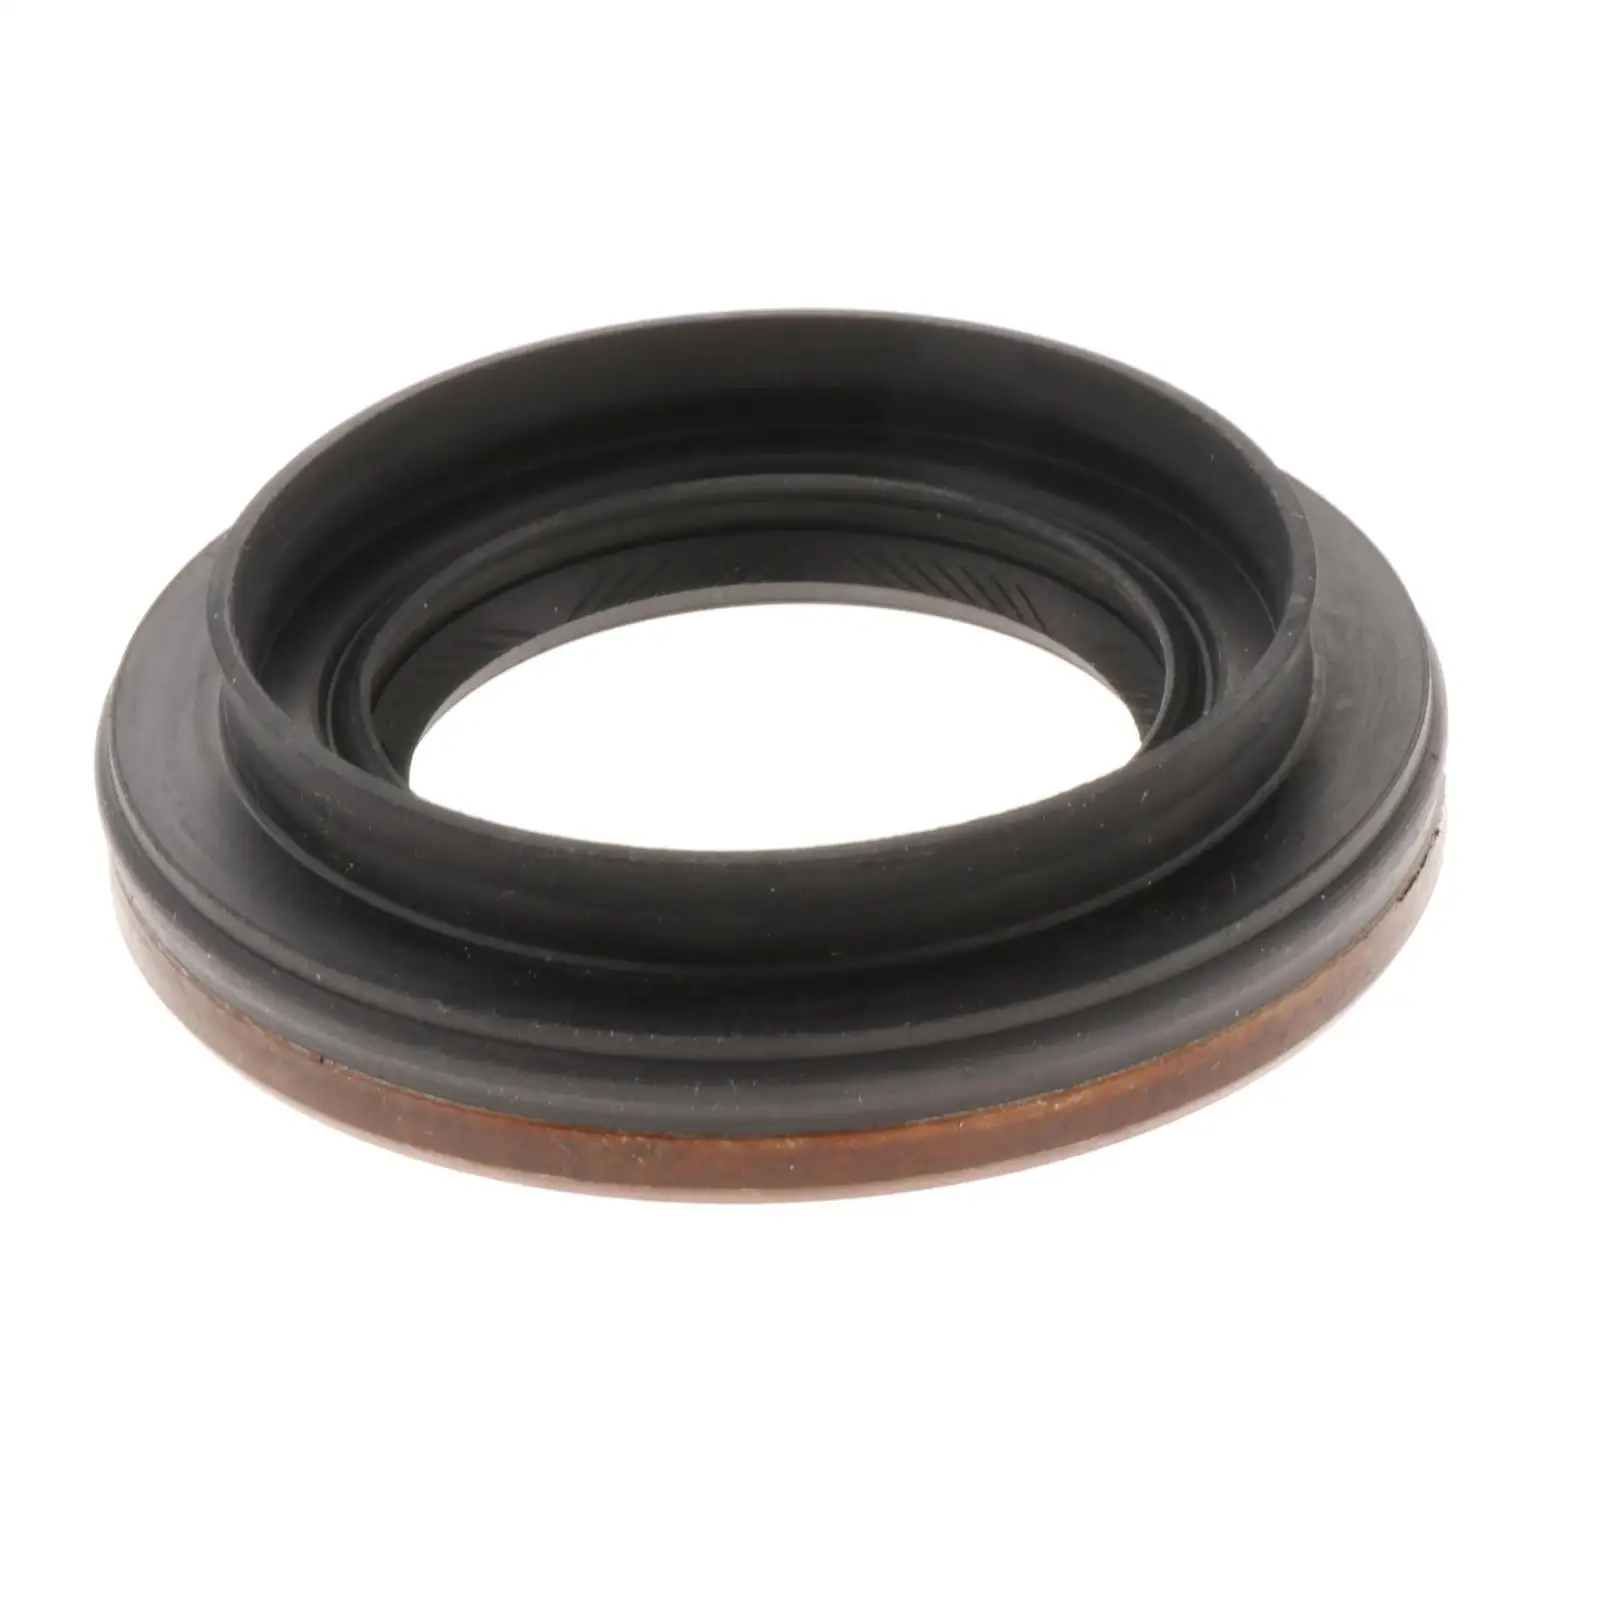 Right Half Oil Seal Axle Oil Seal Fits for  for Qi Jun 2.5 Replaces